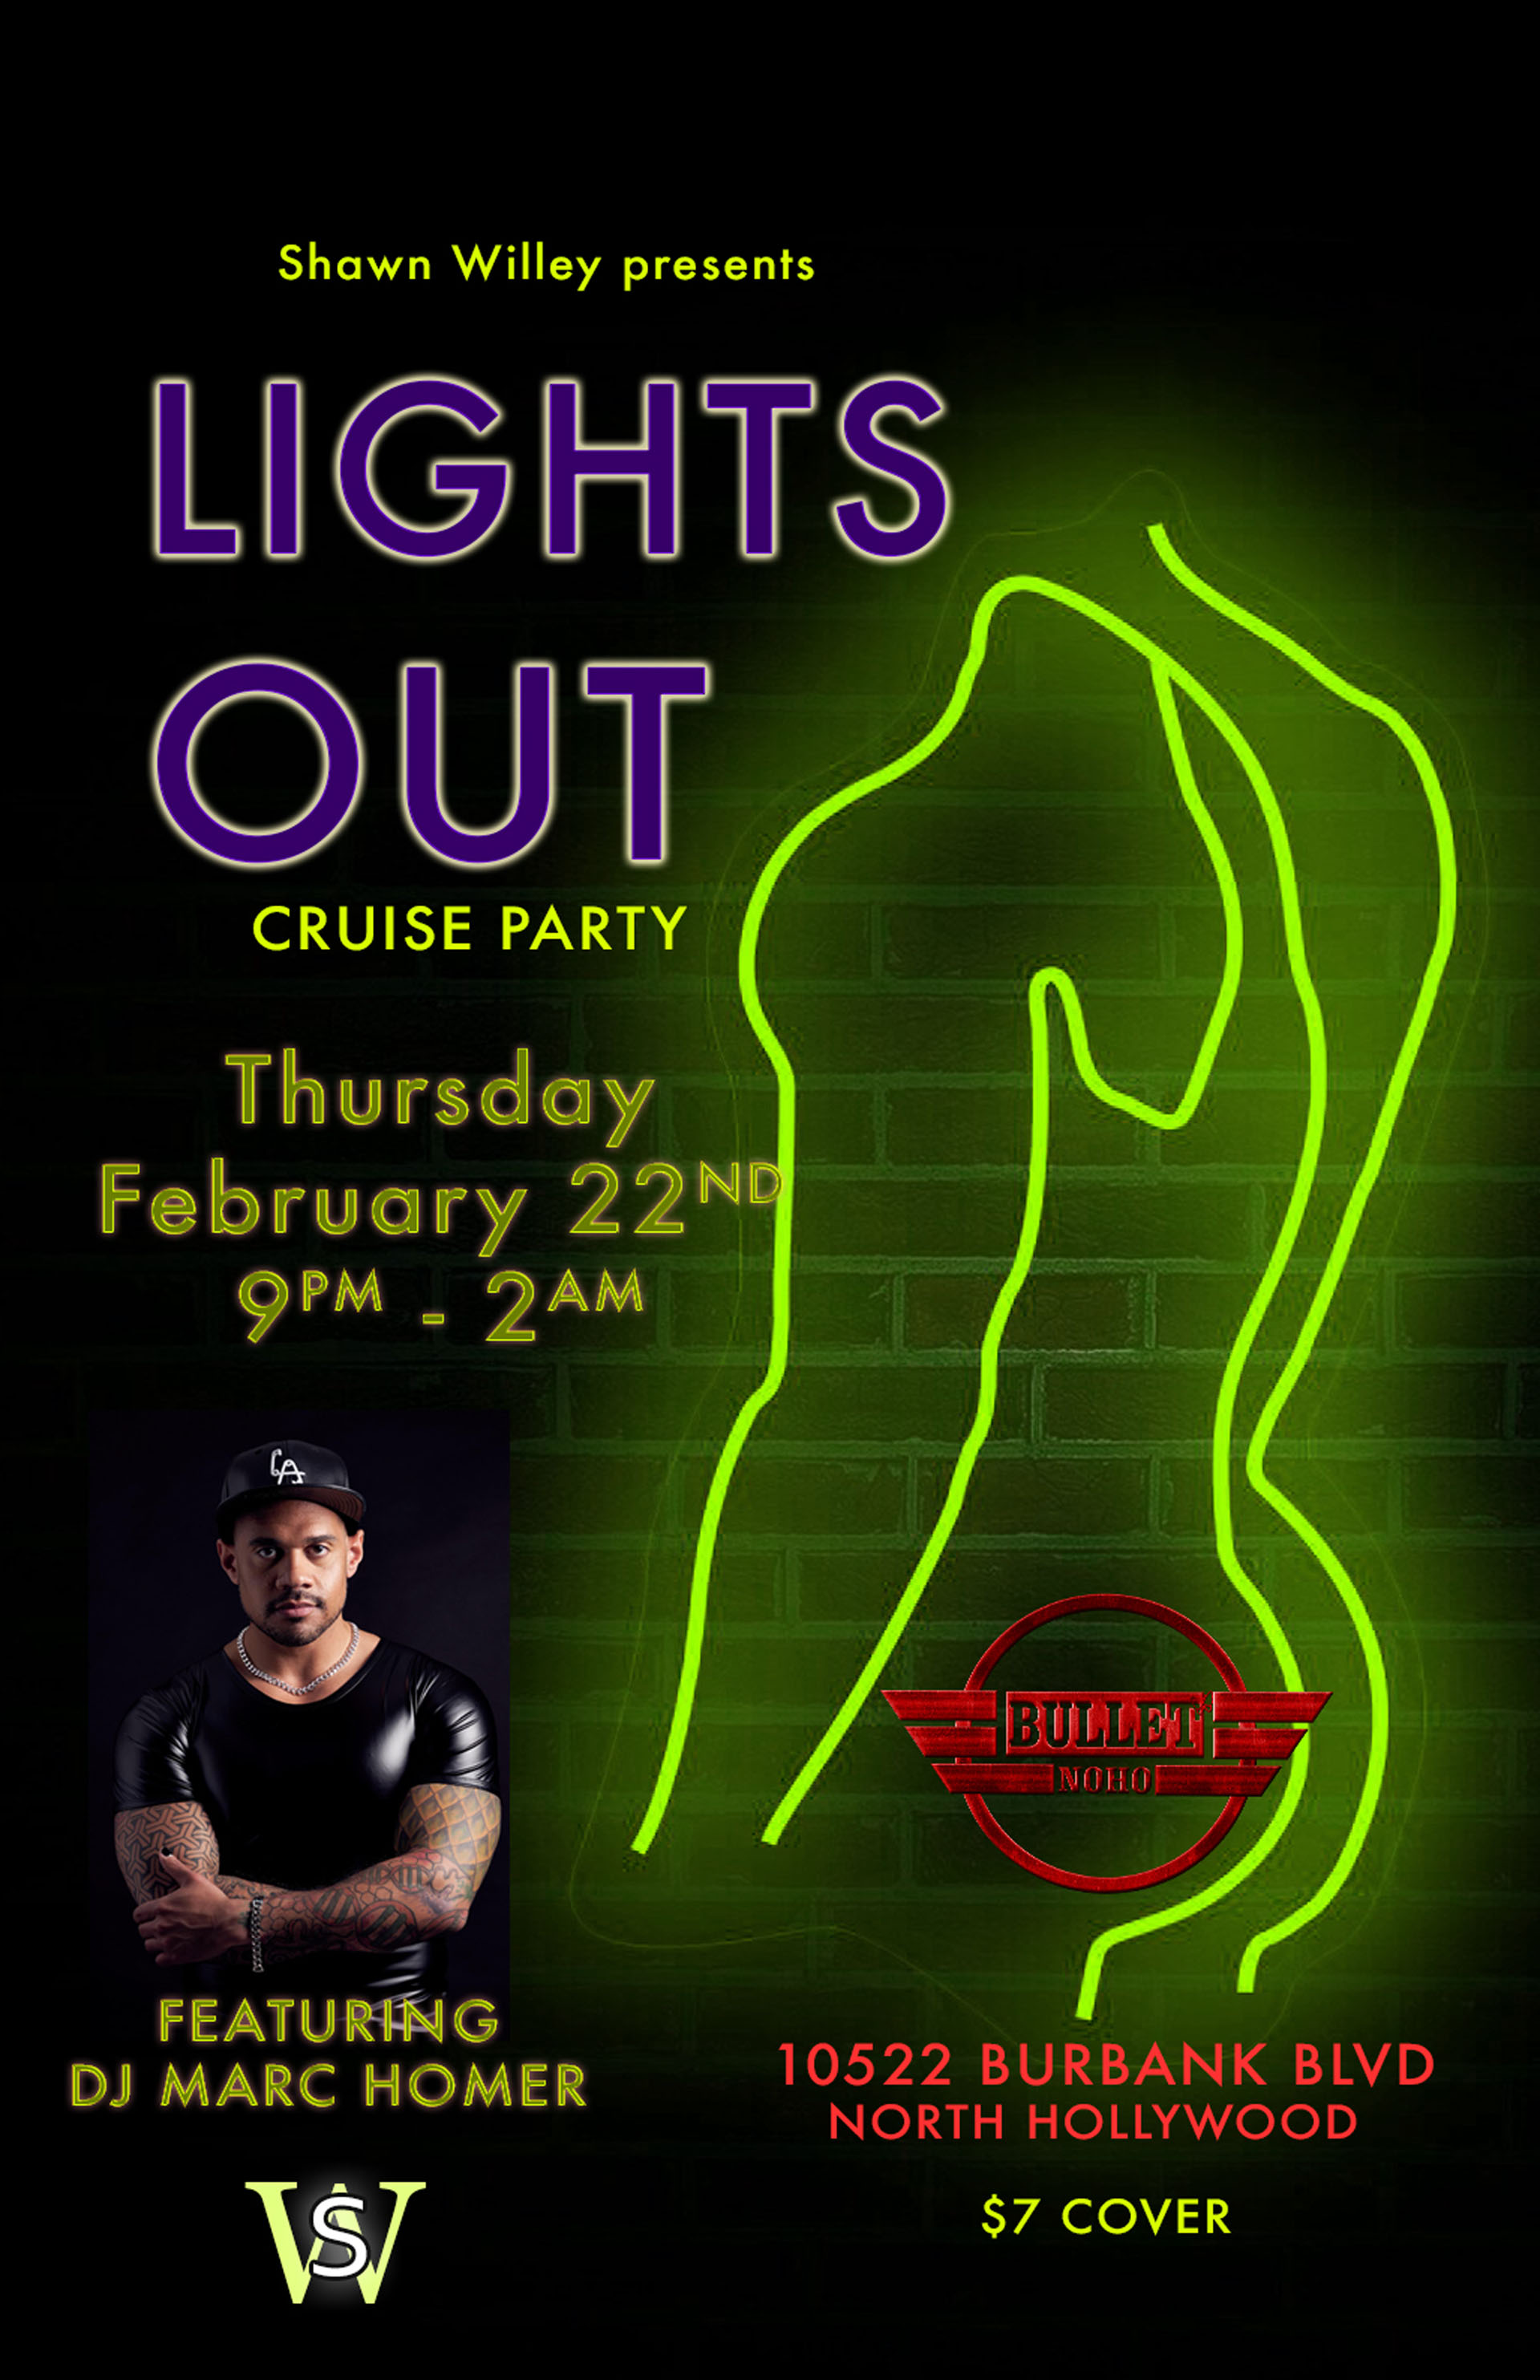 THE BULLET BAR Presents SHAWN WILLEY LIGHTS OUT CRUISE PARTY: Thursday, 02/22/24, 9:00 PM to 2:00 AM. Featuring DJ MARC HOMER. $7 cover.